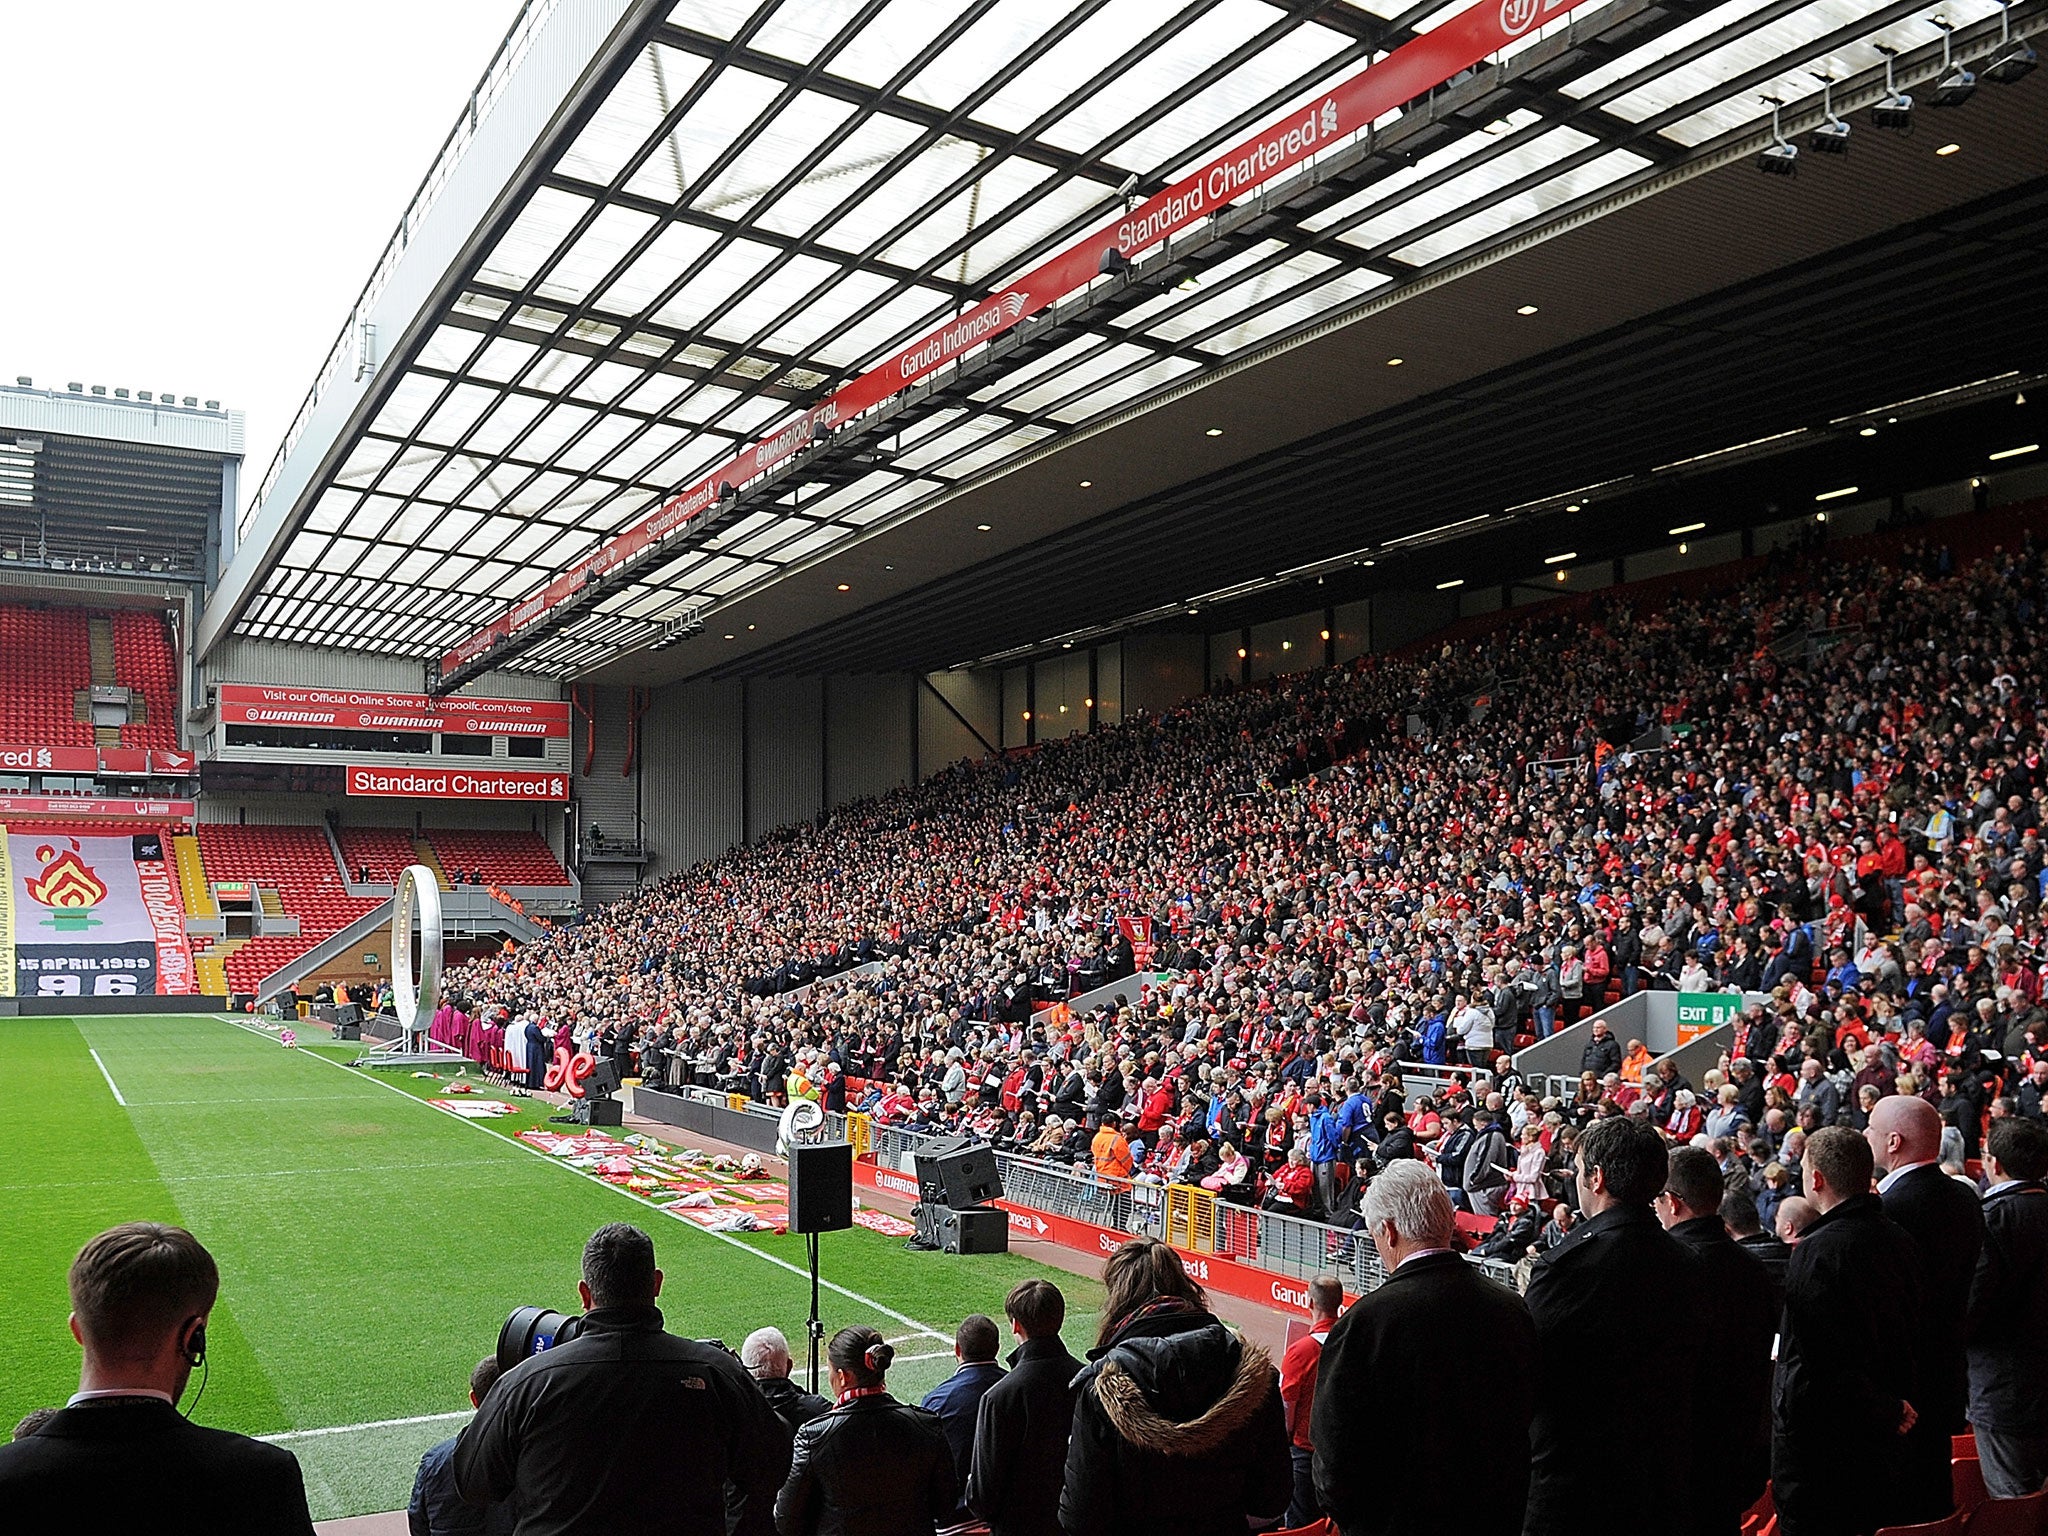 The Kop stand during the memorial service marking the 26th anniversary of the Hillsborough Disaster, at Anfield Stadium (Getty)